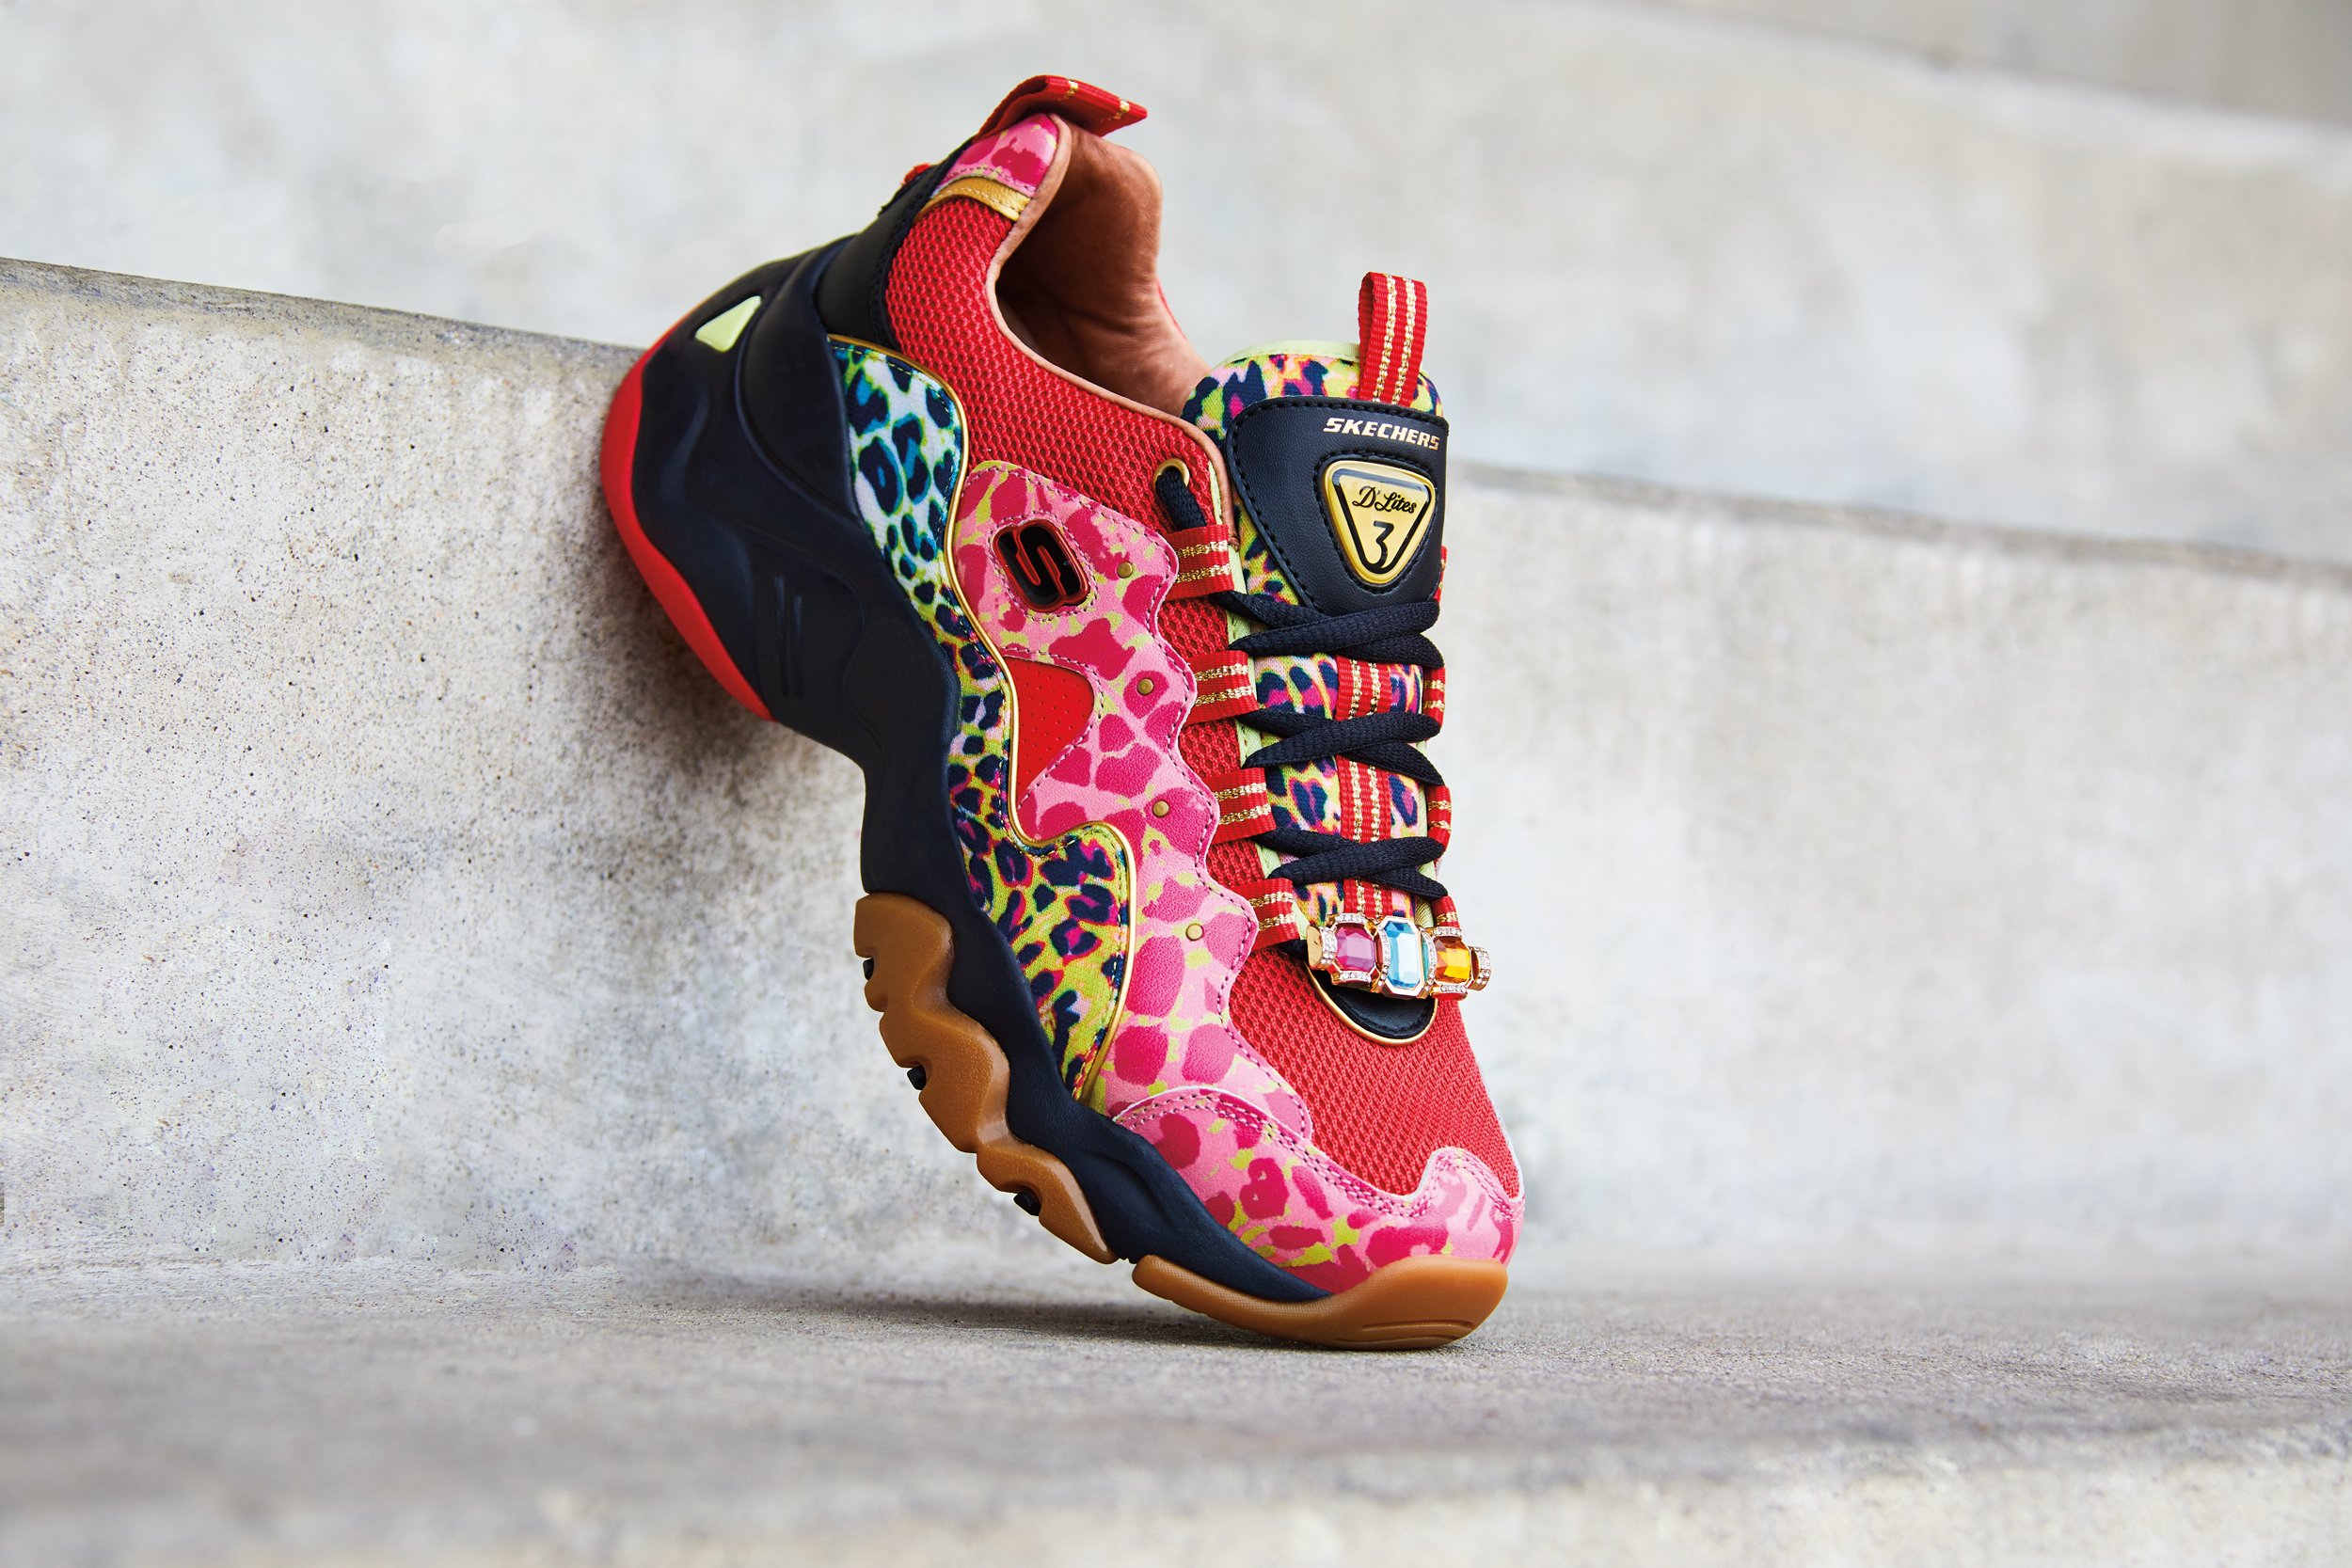 SKECHERS USA on X: "Limited Edition Alert! 🚨 @skechers - Limited Edition D'Lites Capsule Collection! Find them in select Skechers stores NY, SF, MIA &amp; LV. Read all about